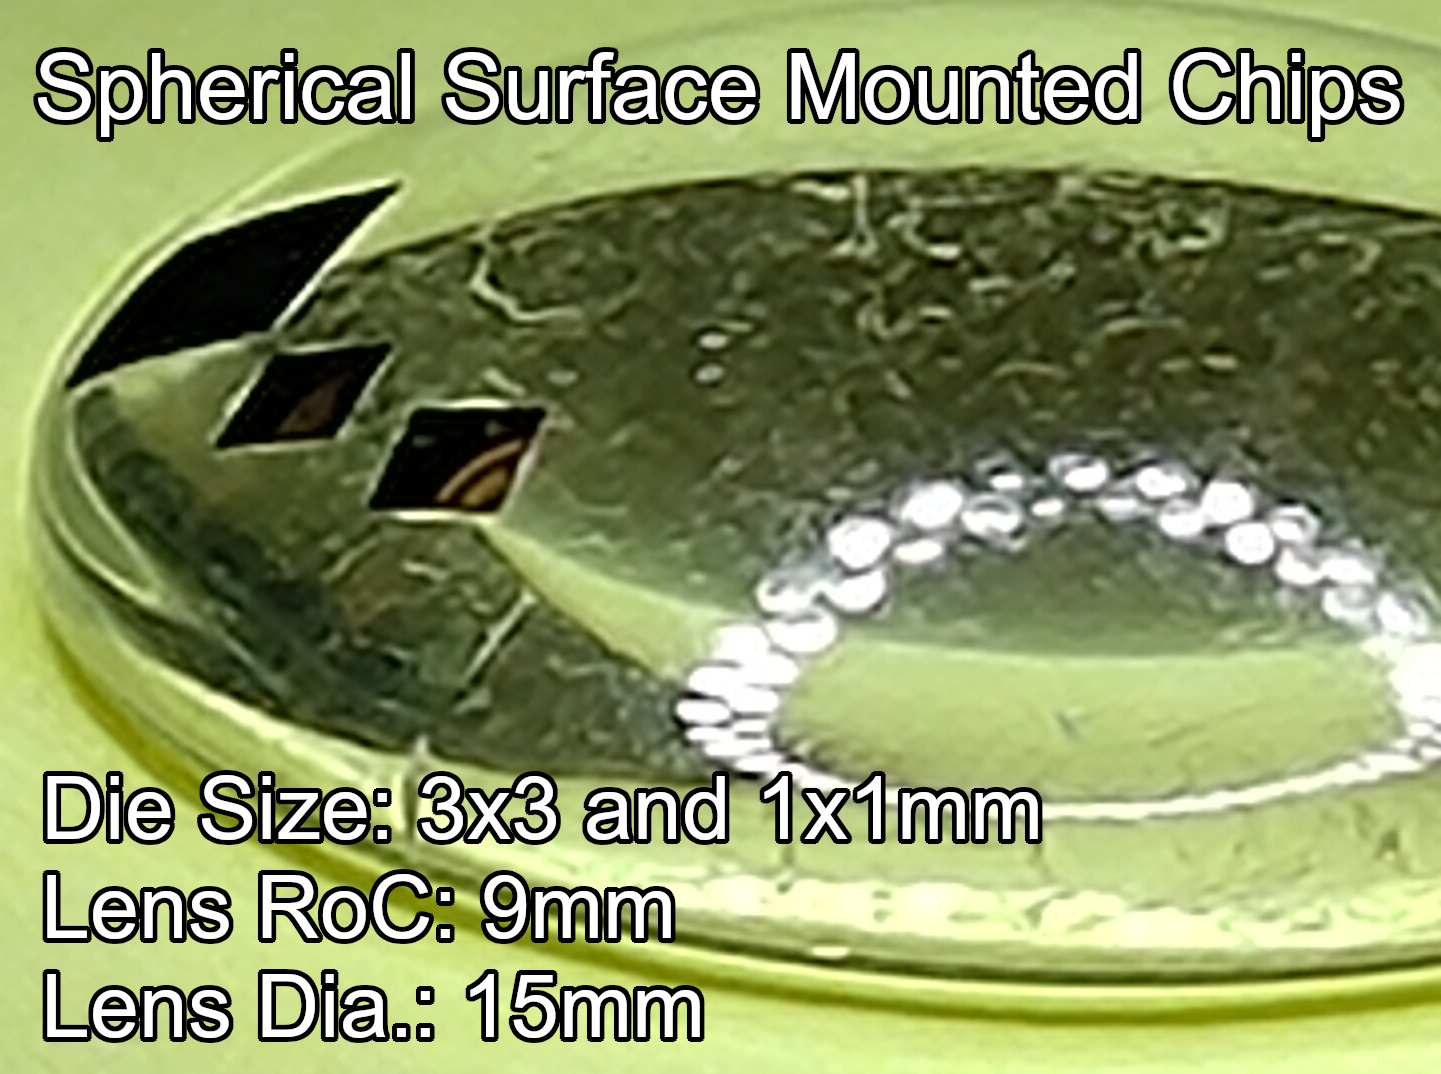 A flexible die mounted on a spherical surface